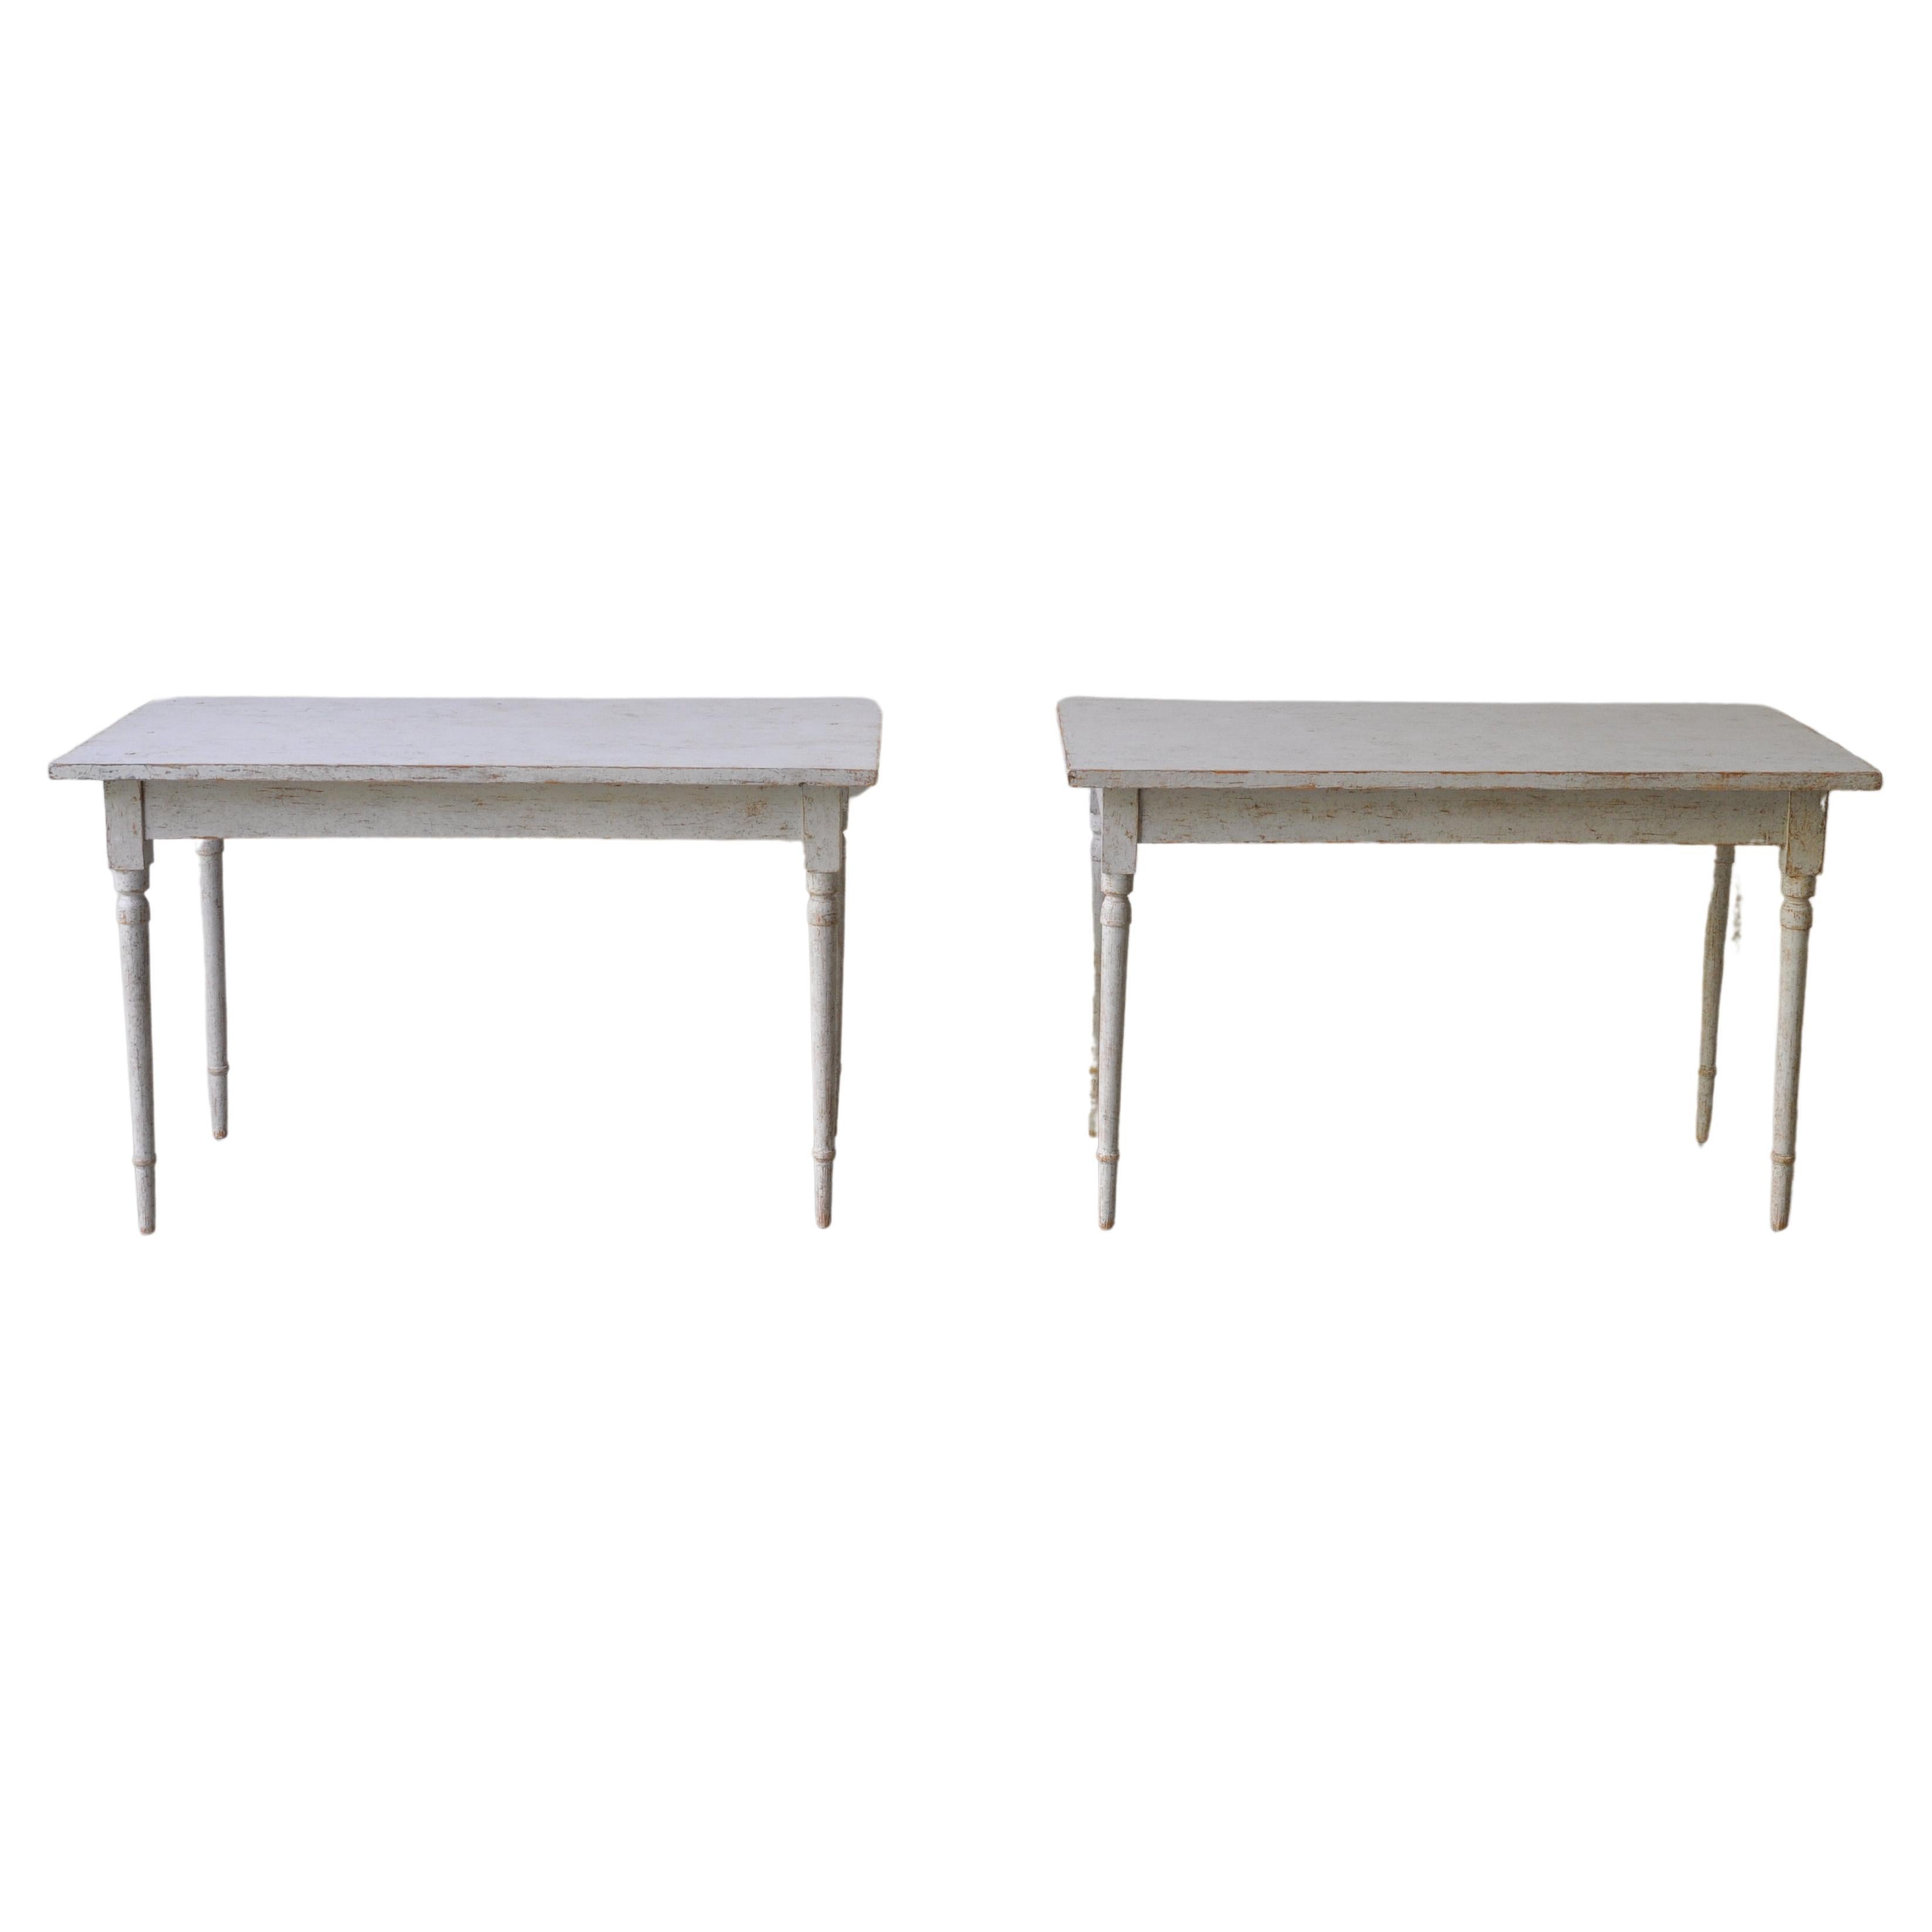 Pair of Swedish 1840s Light Gray Painted Side Tables with Distressed Finish For Sale